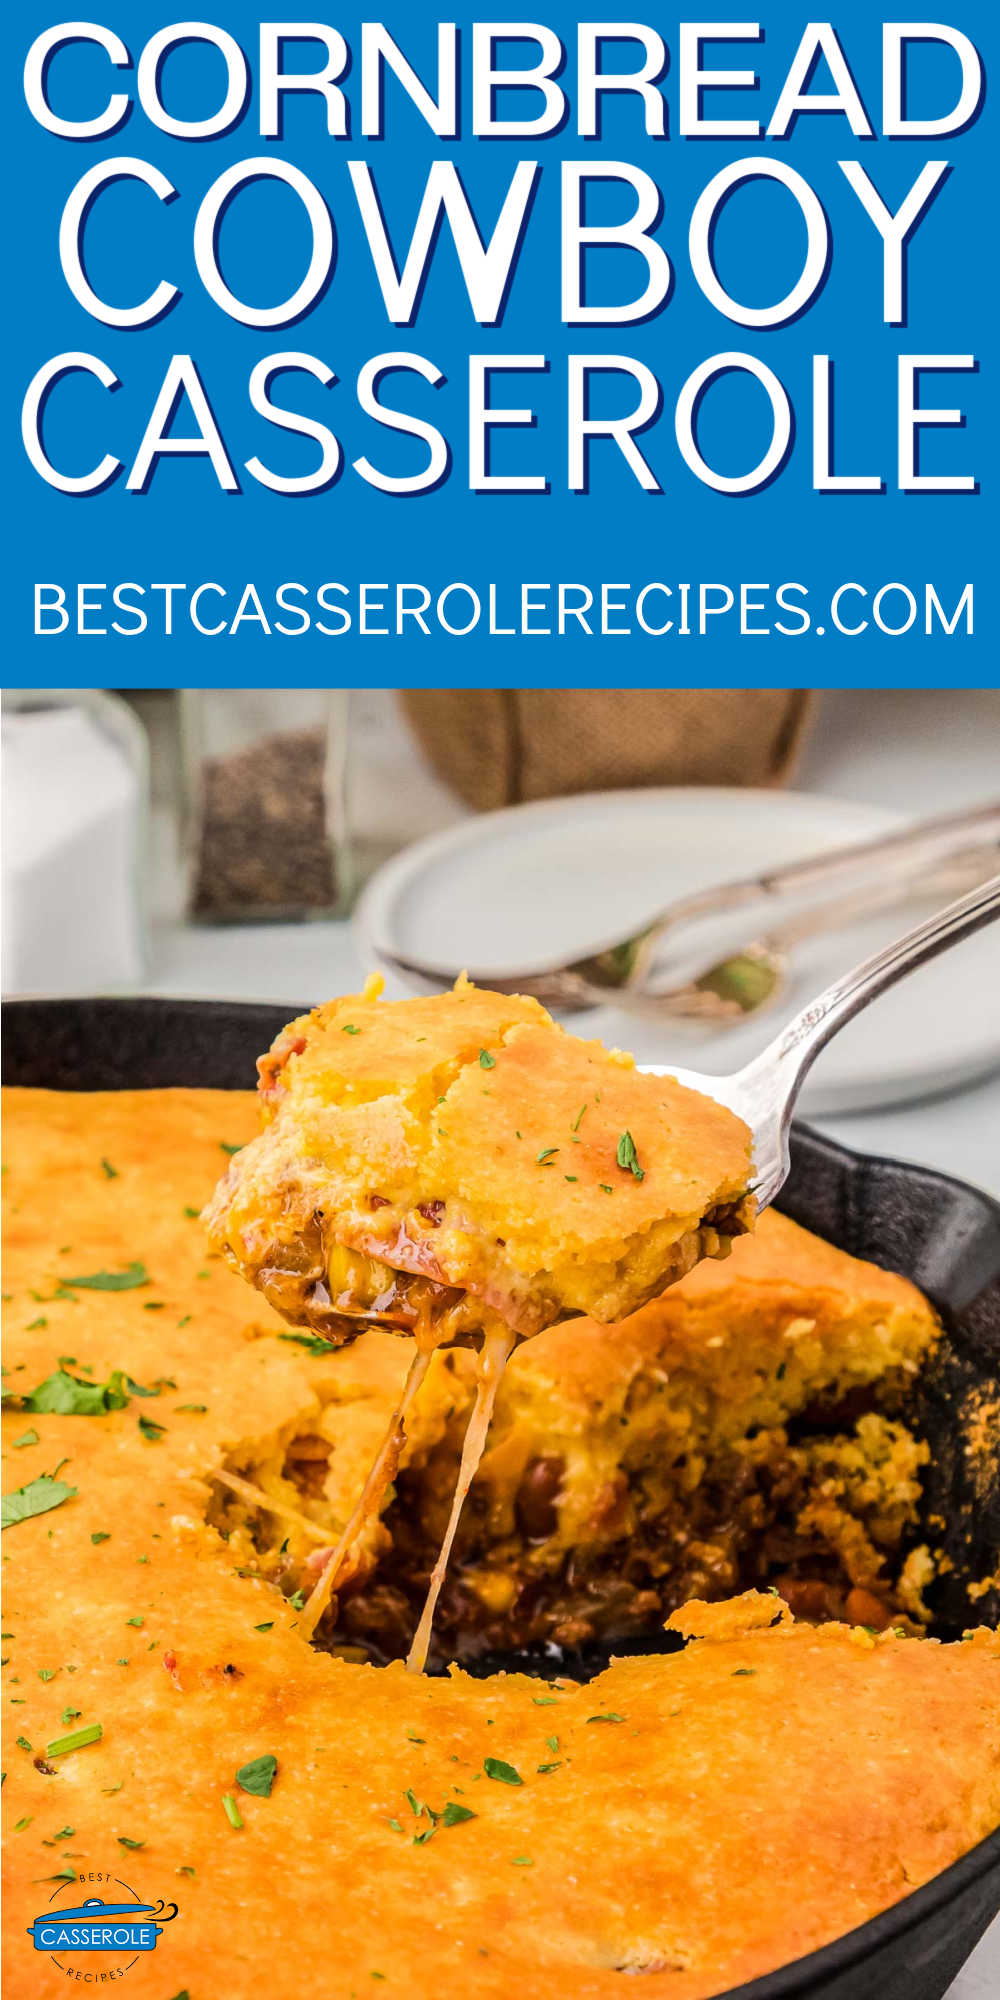 scoop of casserole coming out with a spoon and a blue banner with white text